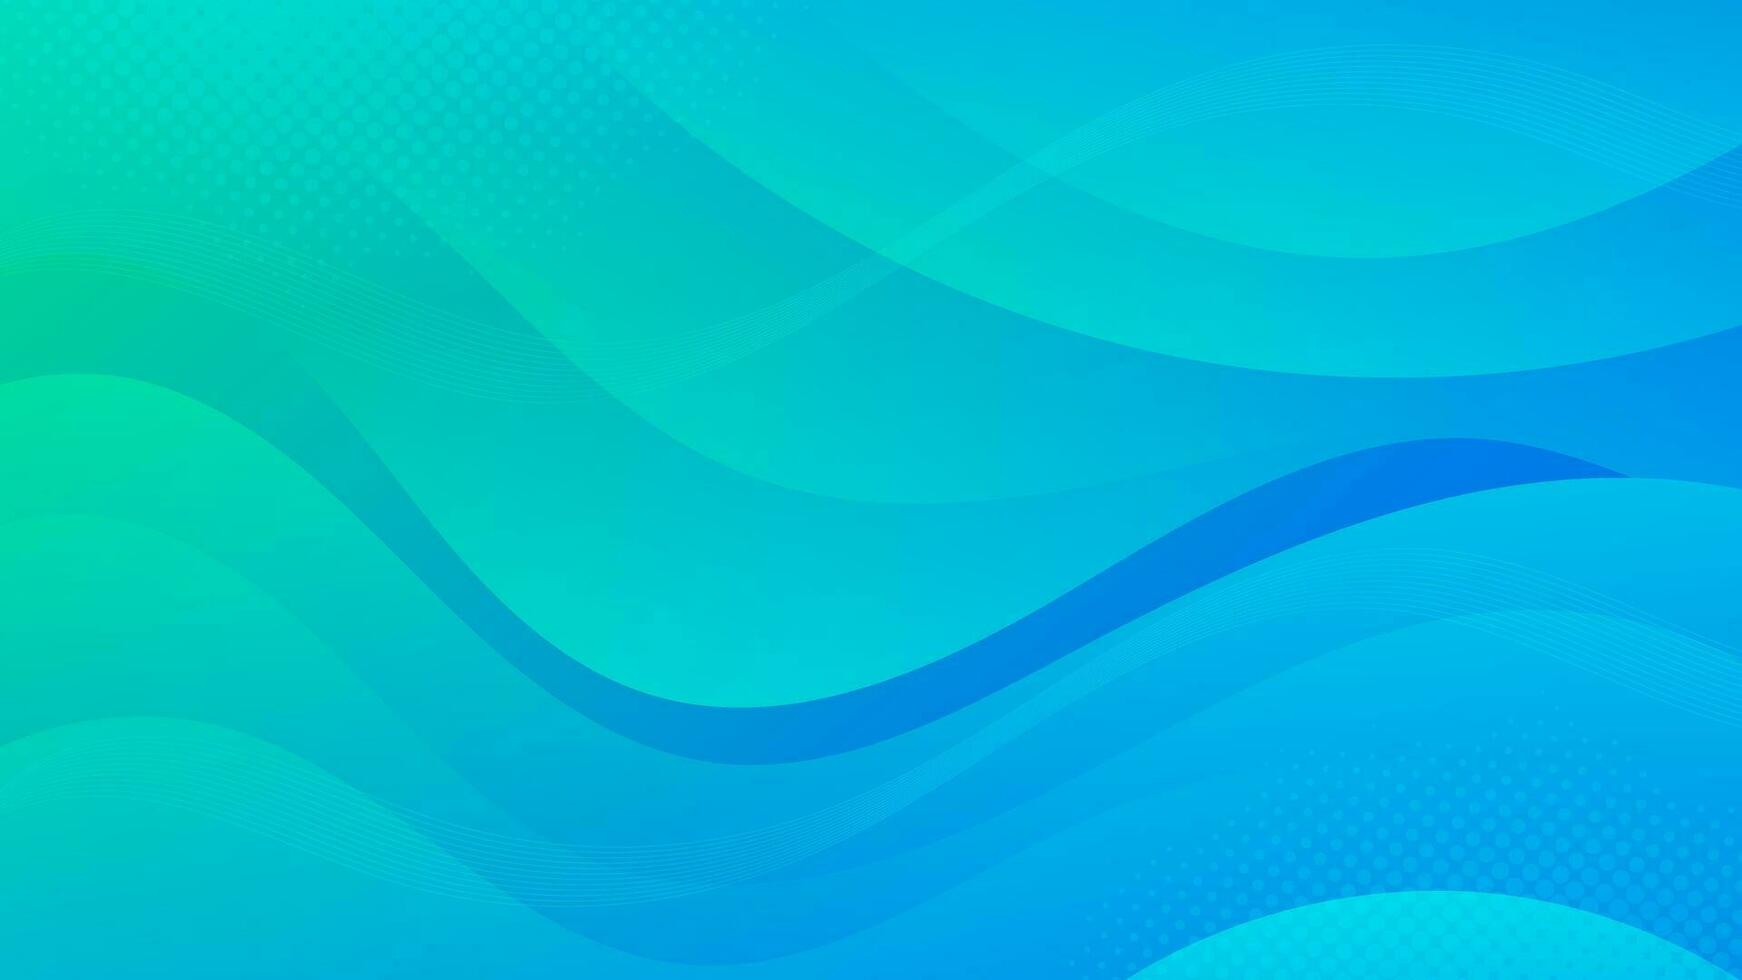 Abstract Green blue Background with Wavy Shapes. flowing and curvy shapes. This asset is suitable for website backgrounds, flyers, posters, and digital art projects. vector